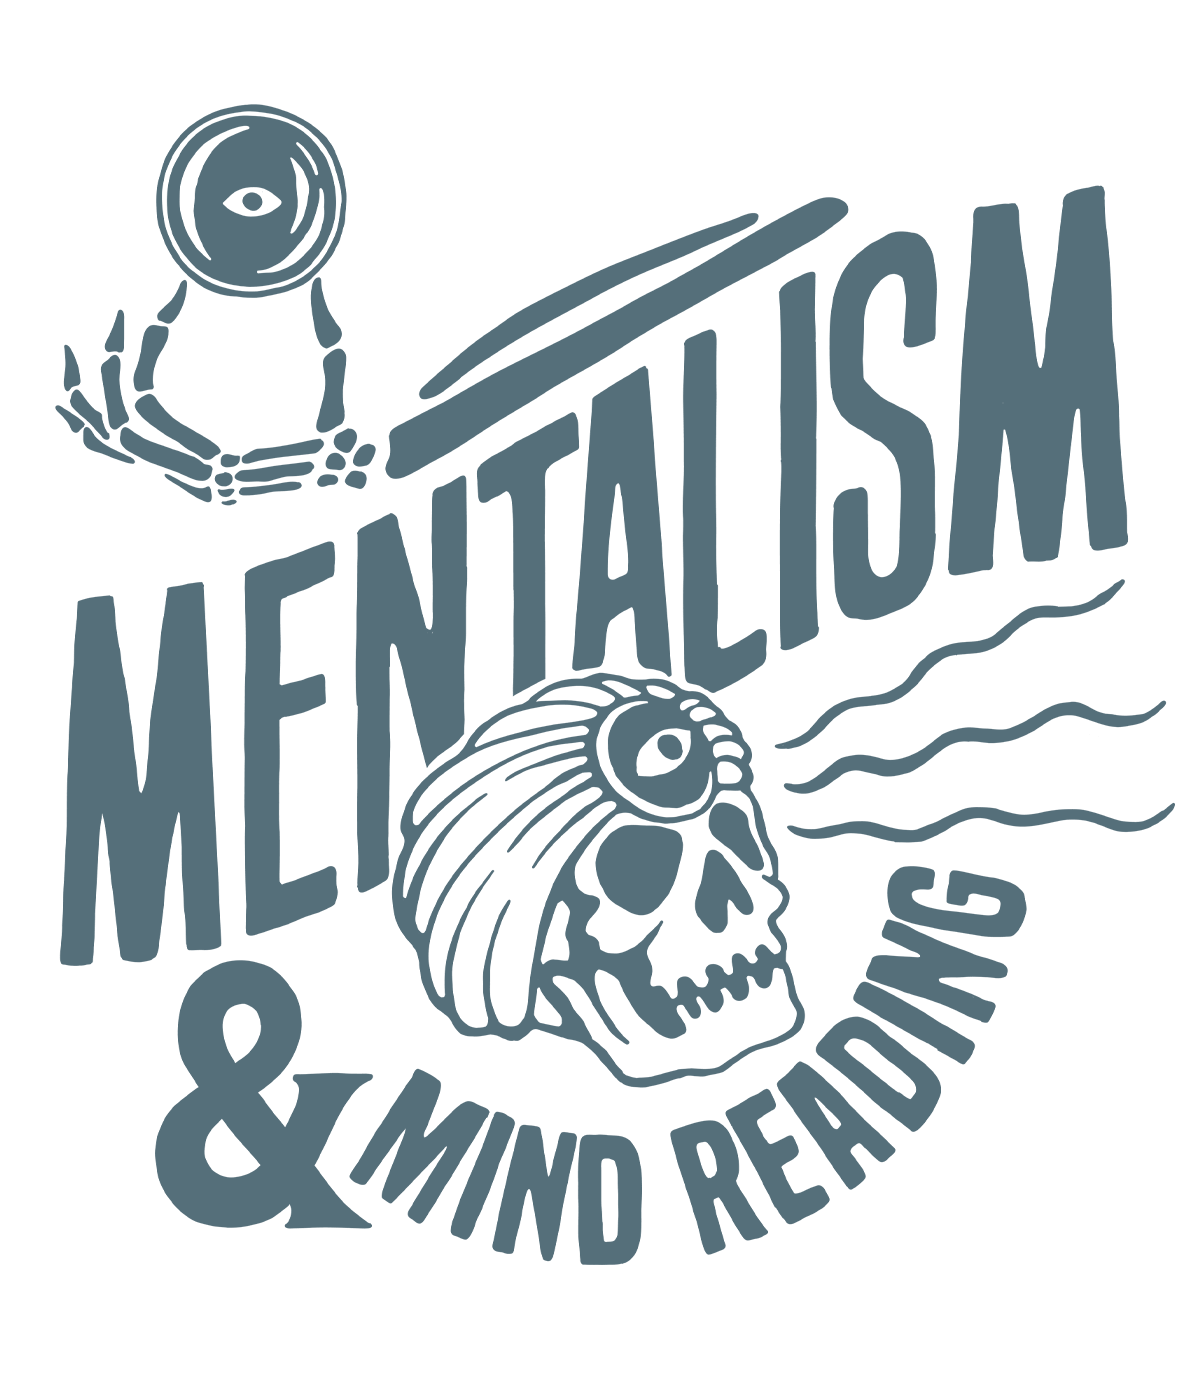 Mentalism and Mind Reading